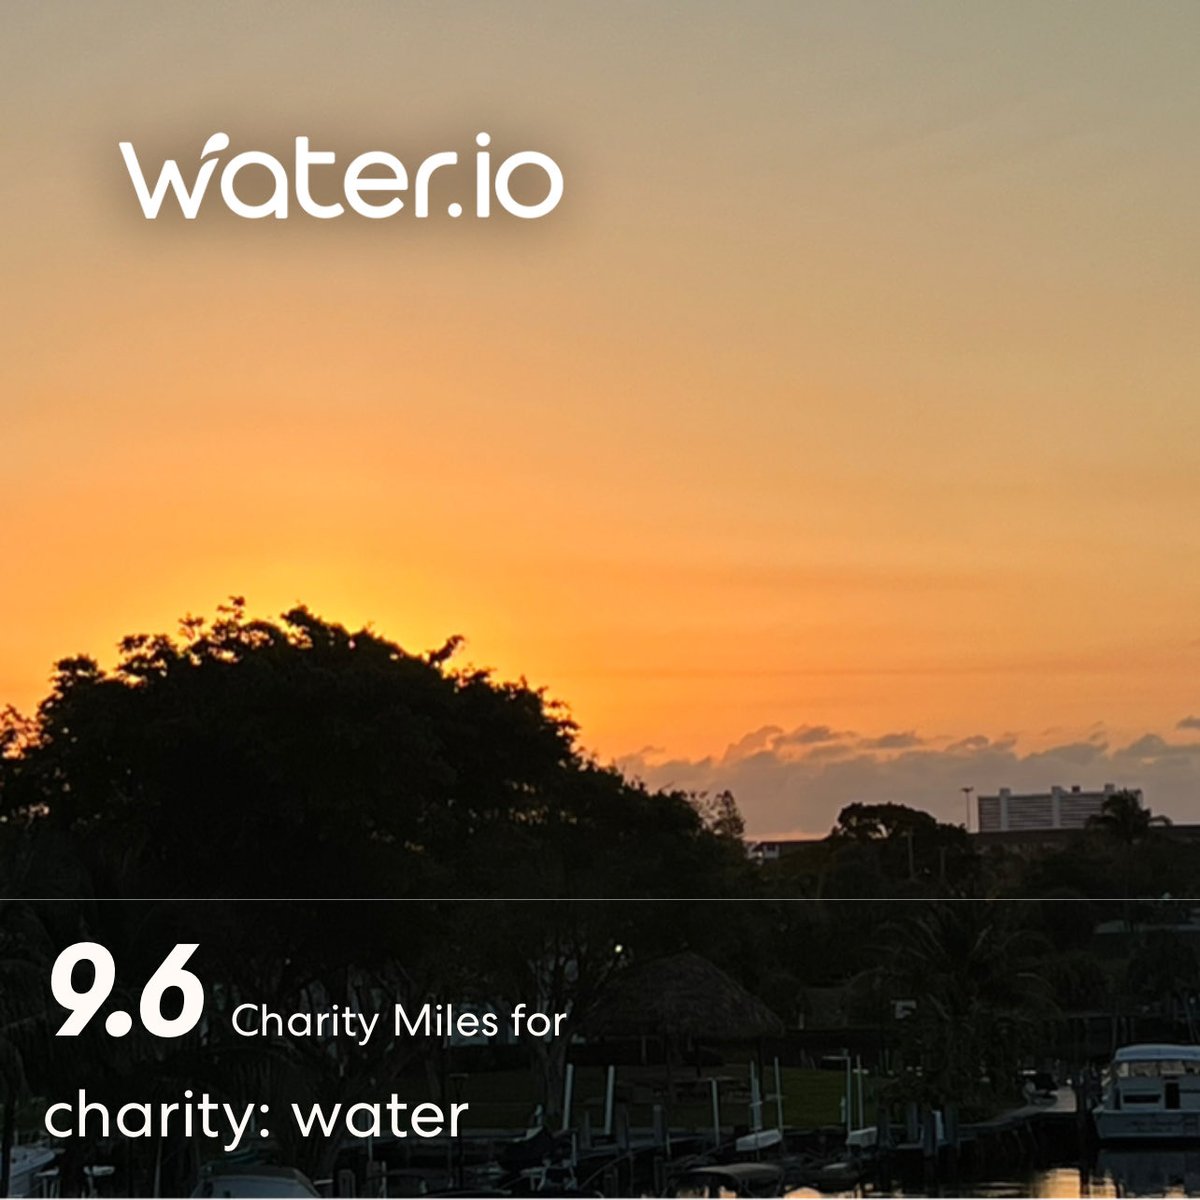 9.6 ⁦@CharityMiles⁩ Miles for ⁦@charitywater⁩ : water. Thanks to everyone who has sponsored me!
miles.app.link/e/YuZDqJa8oJb